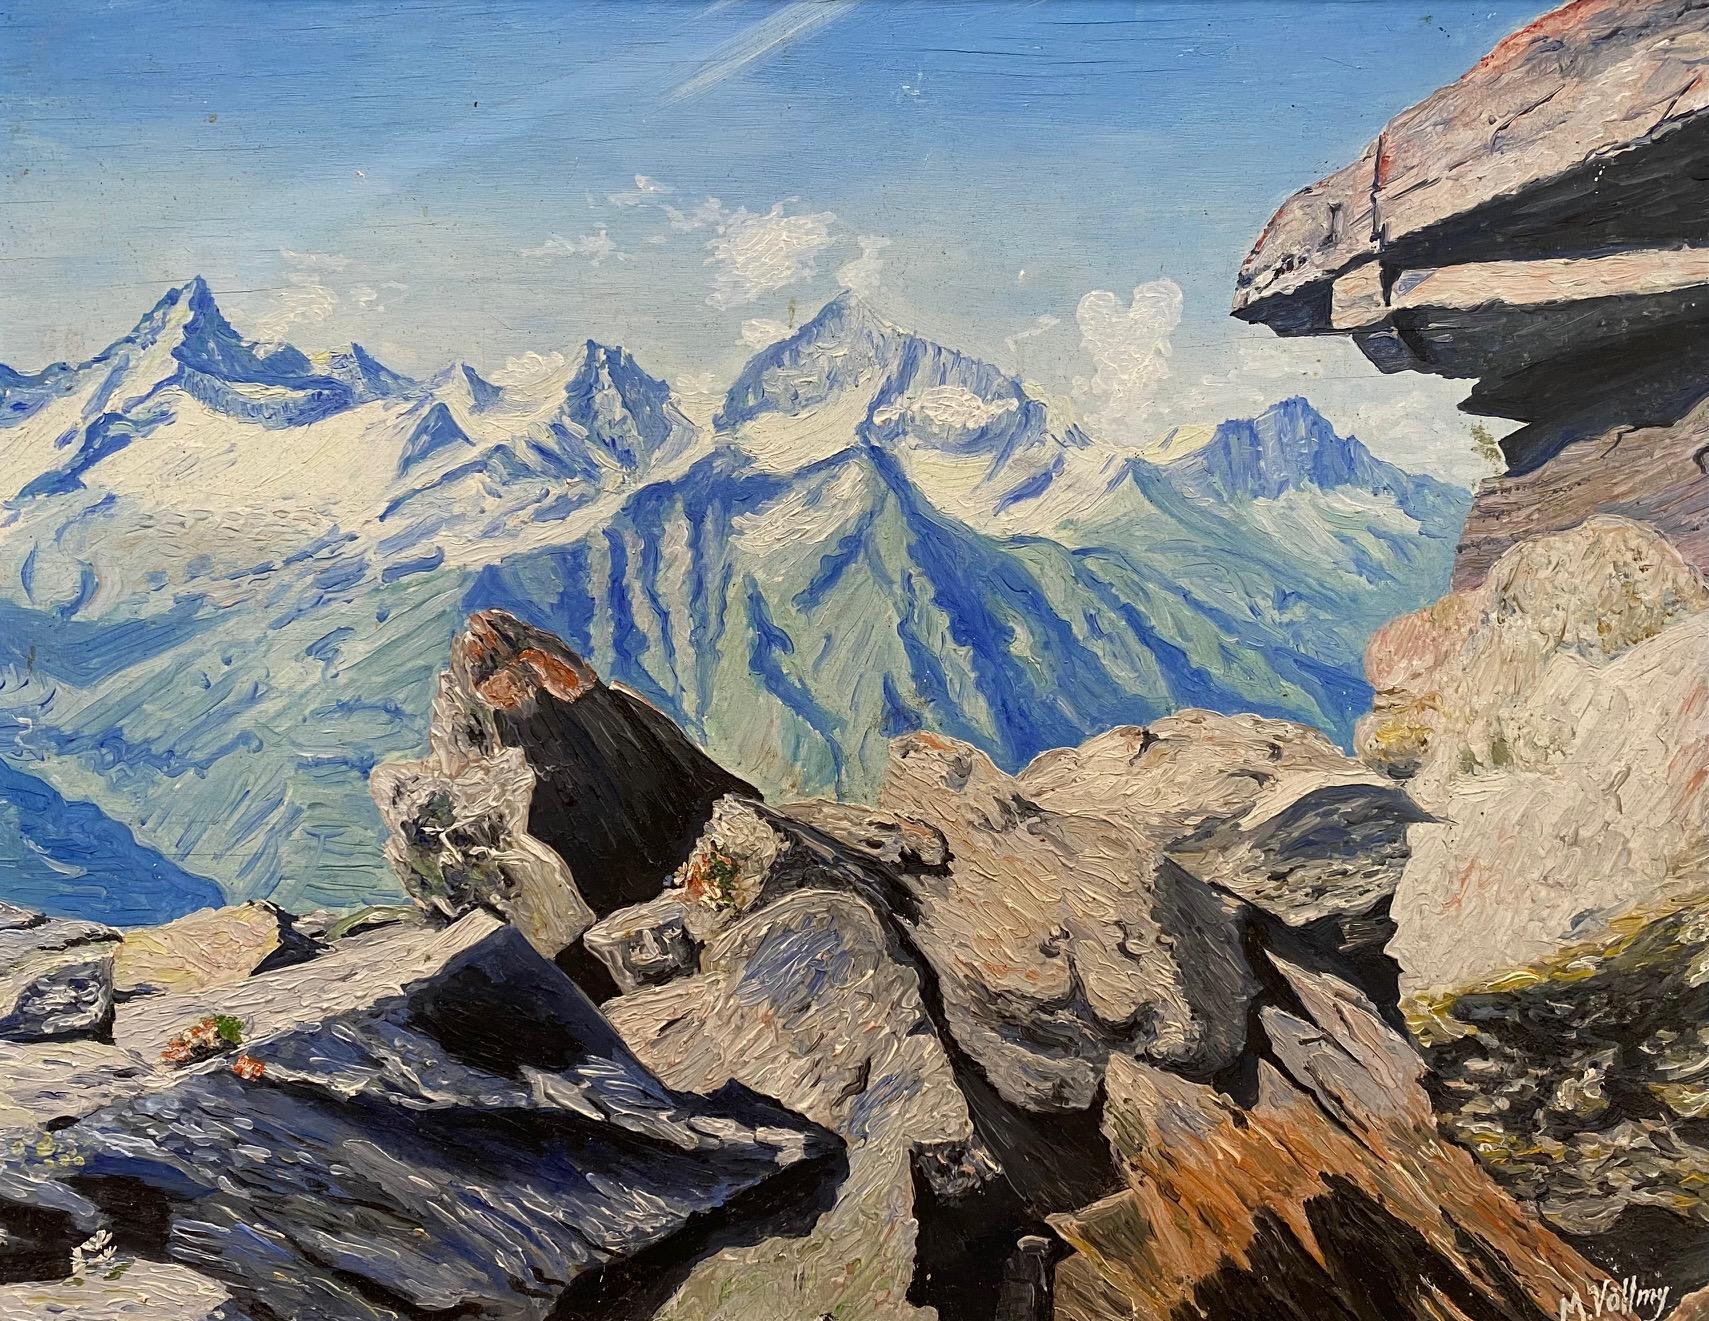 Mountain's view by M. Völlmy - Oil on wood 40x50 cm